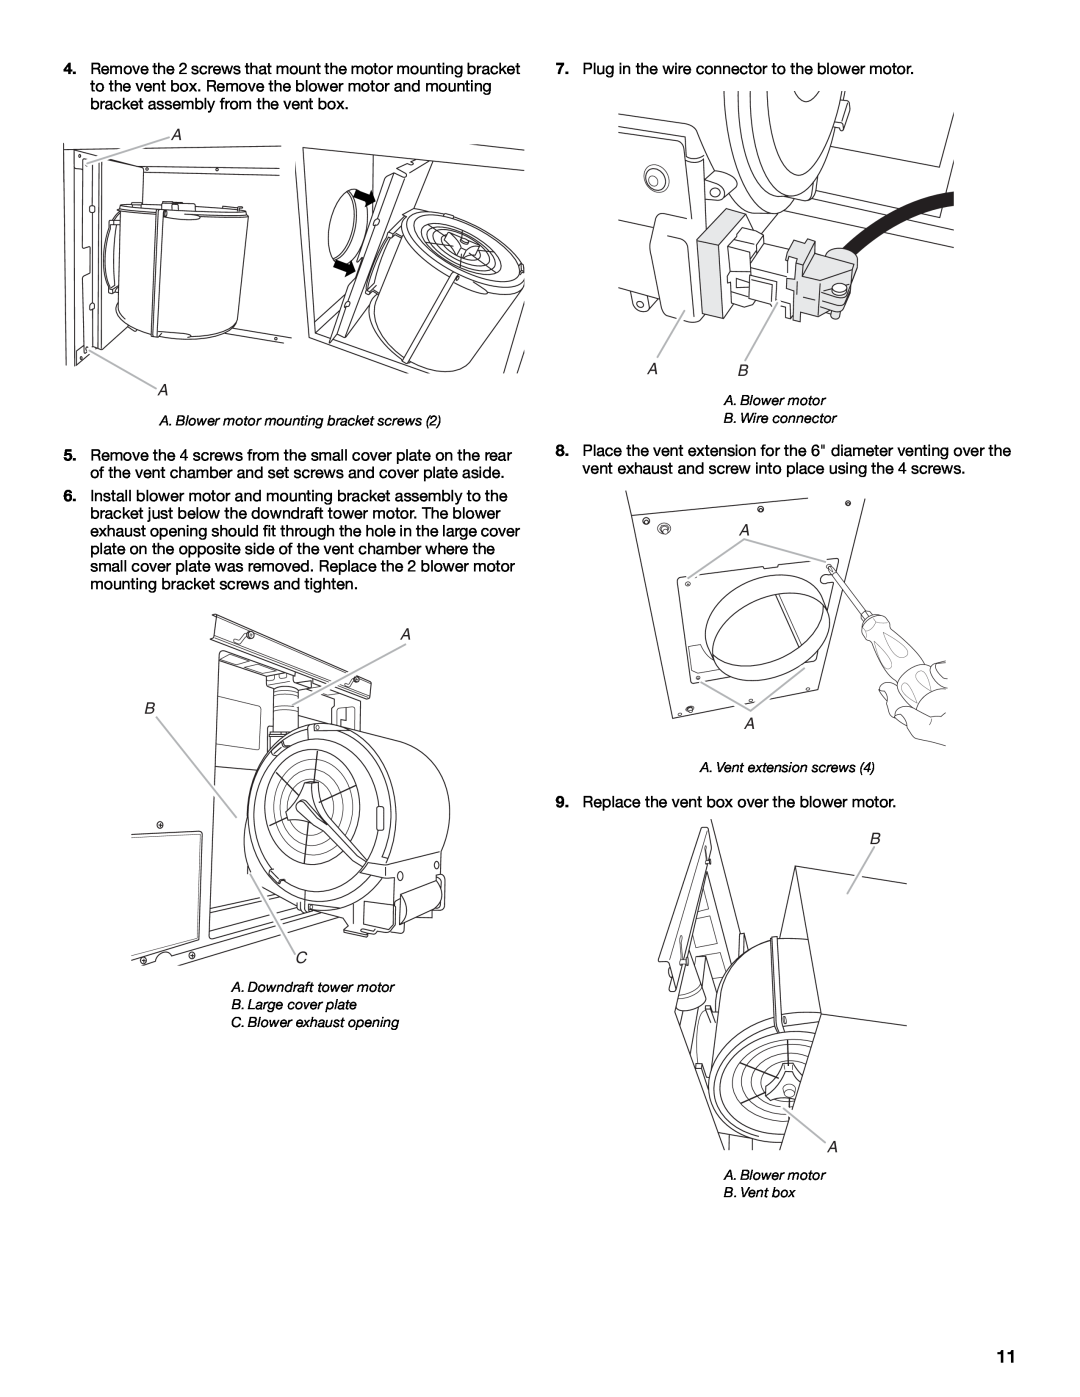 Jenn-Air W10201609B installation instructions A B C, Plug in the wire connector to the blower motor 